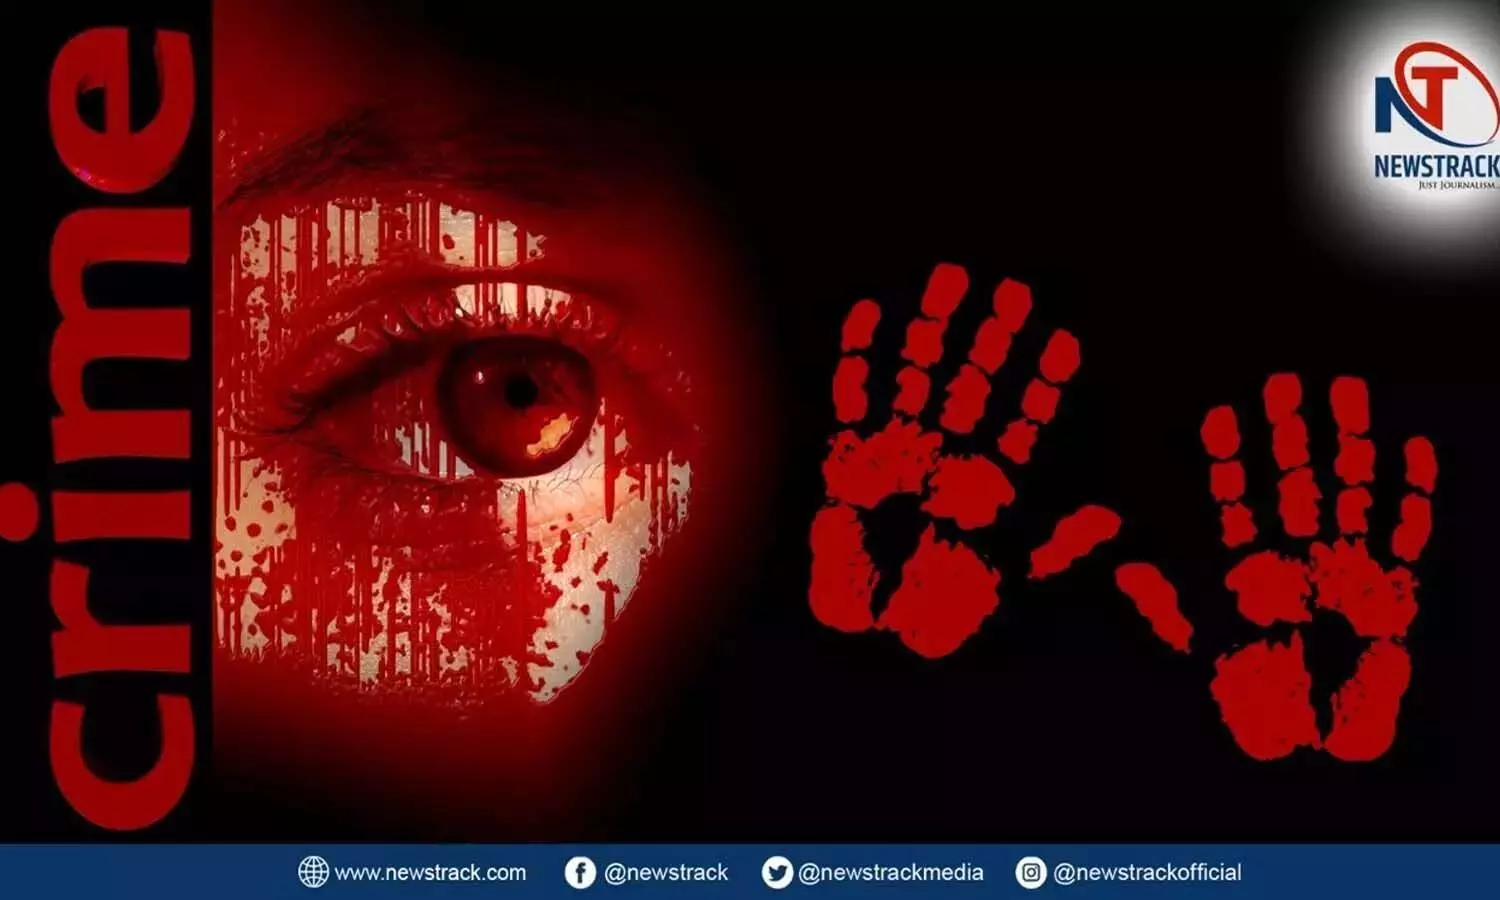 Woman gang-raped in Lucknow, accused said if she opens her mouth, she will kill her son